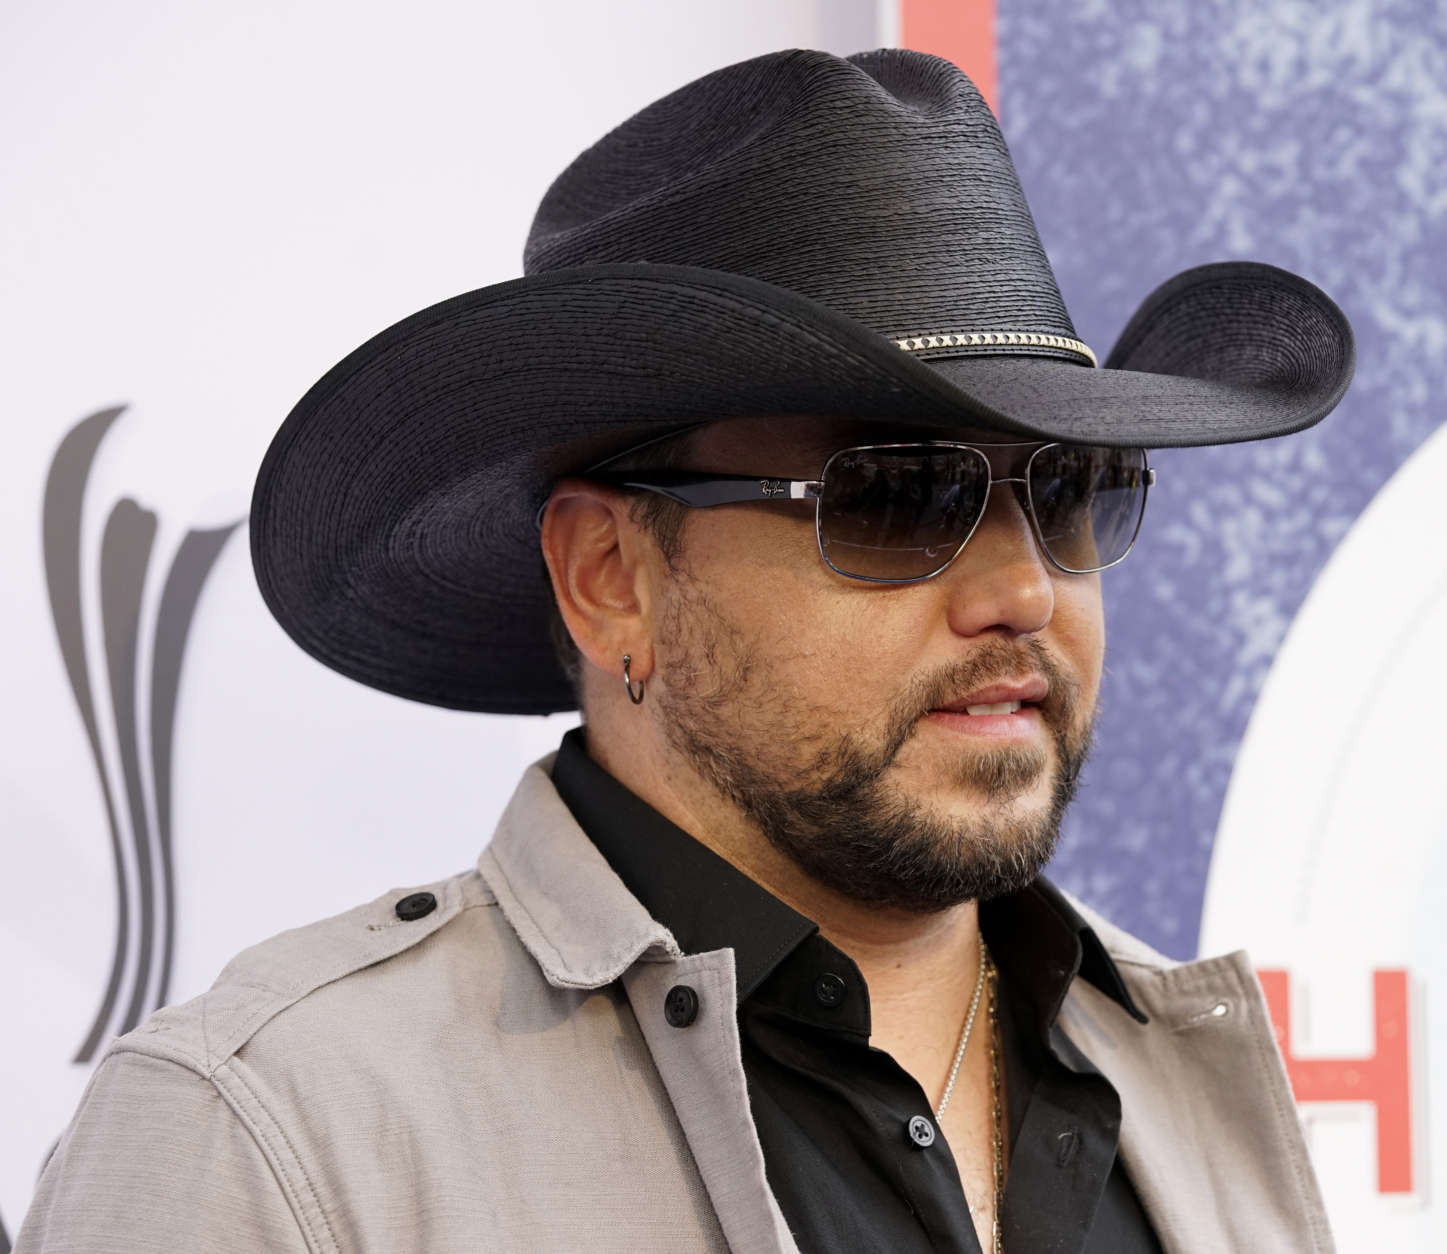 Jason Aldean arrives at the 11th annual ACM Honors at Ryman Auditorium on Wednesday, Aug. 23, 2017, in Nashville, Tenn. (Photo by Sanford Myers/Invision/AP)